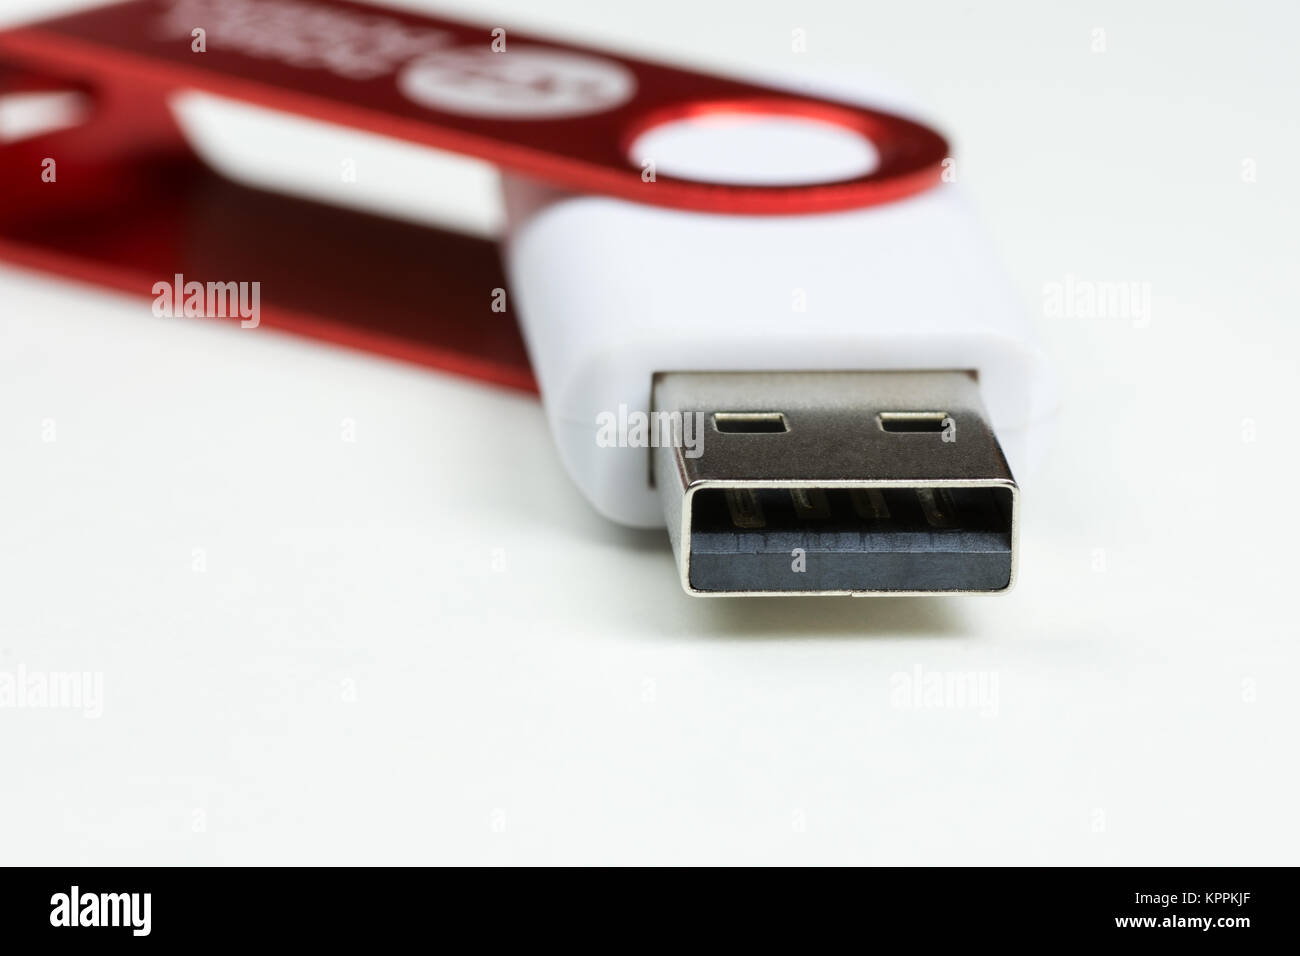 Close-up view of a white USB Flash Drive connector with red cap, on a white background Stock Photo